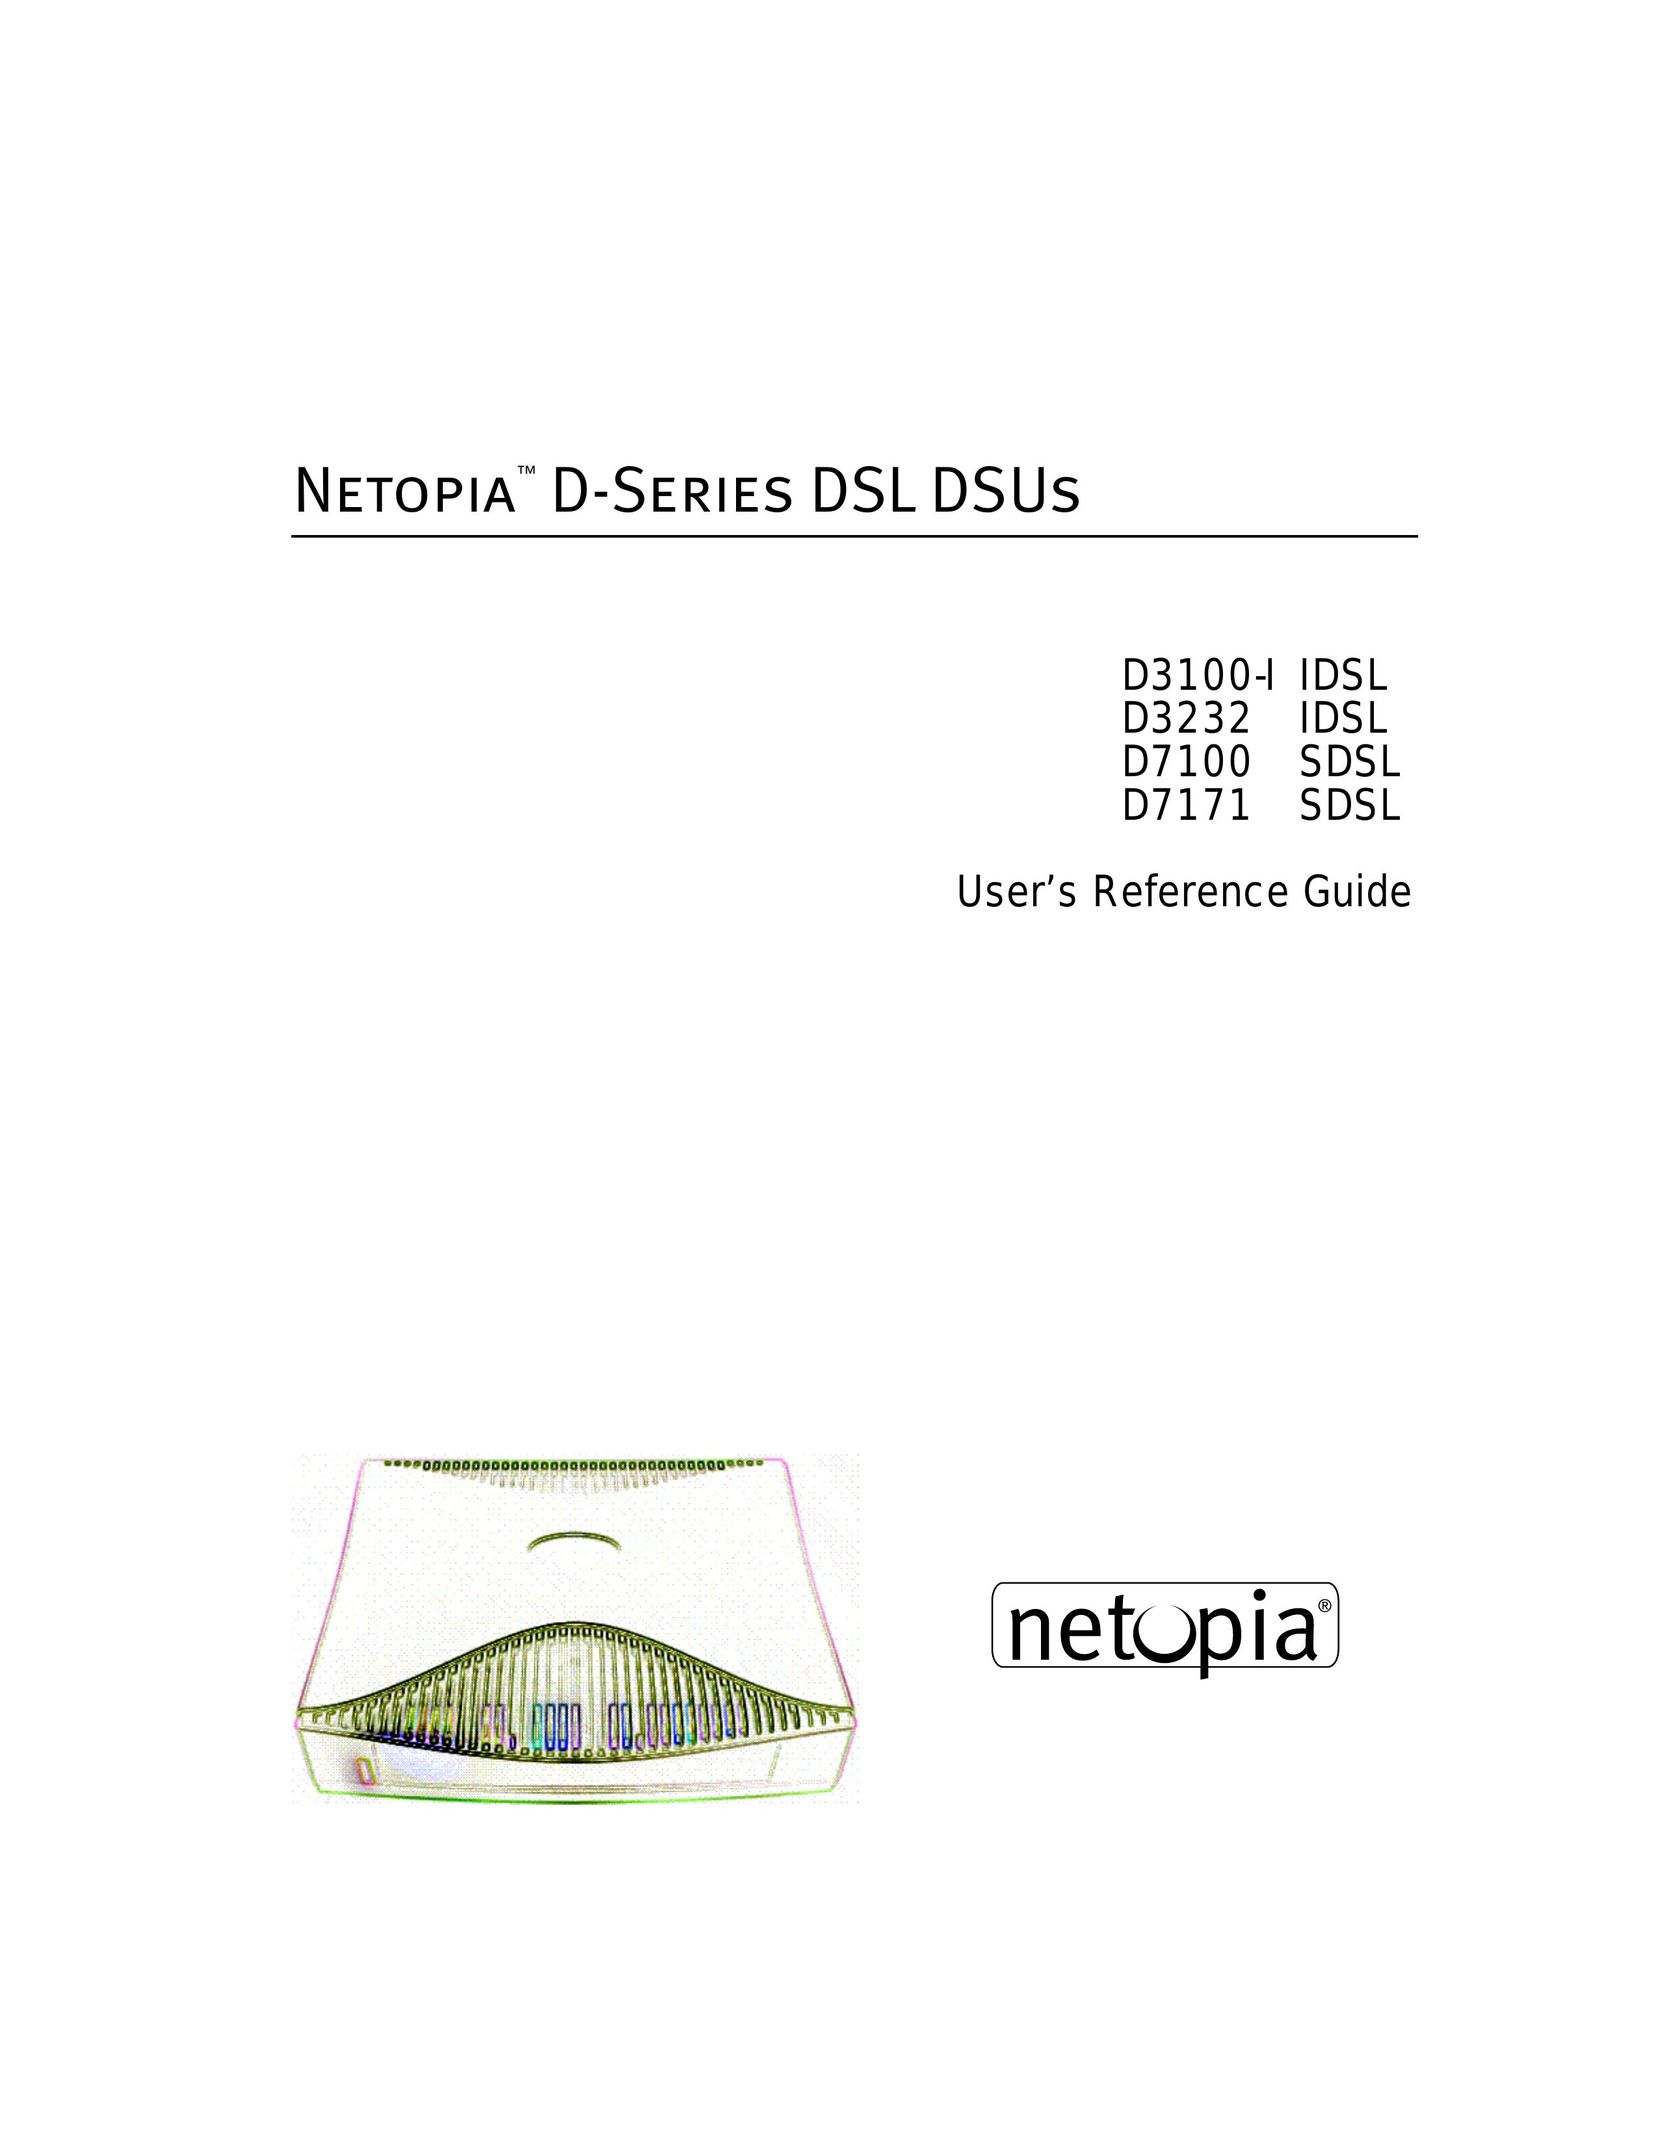 Netopia D3100-I IDSL Network Router User Manual